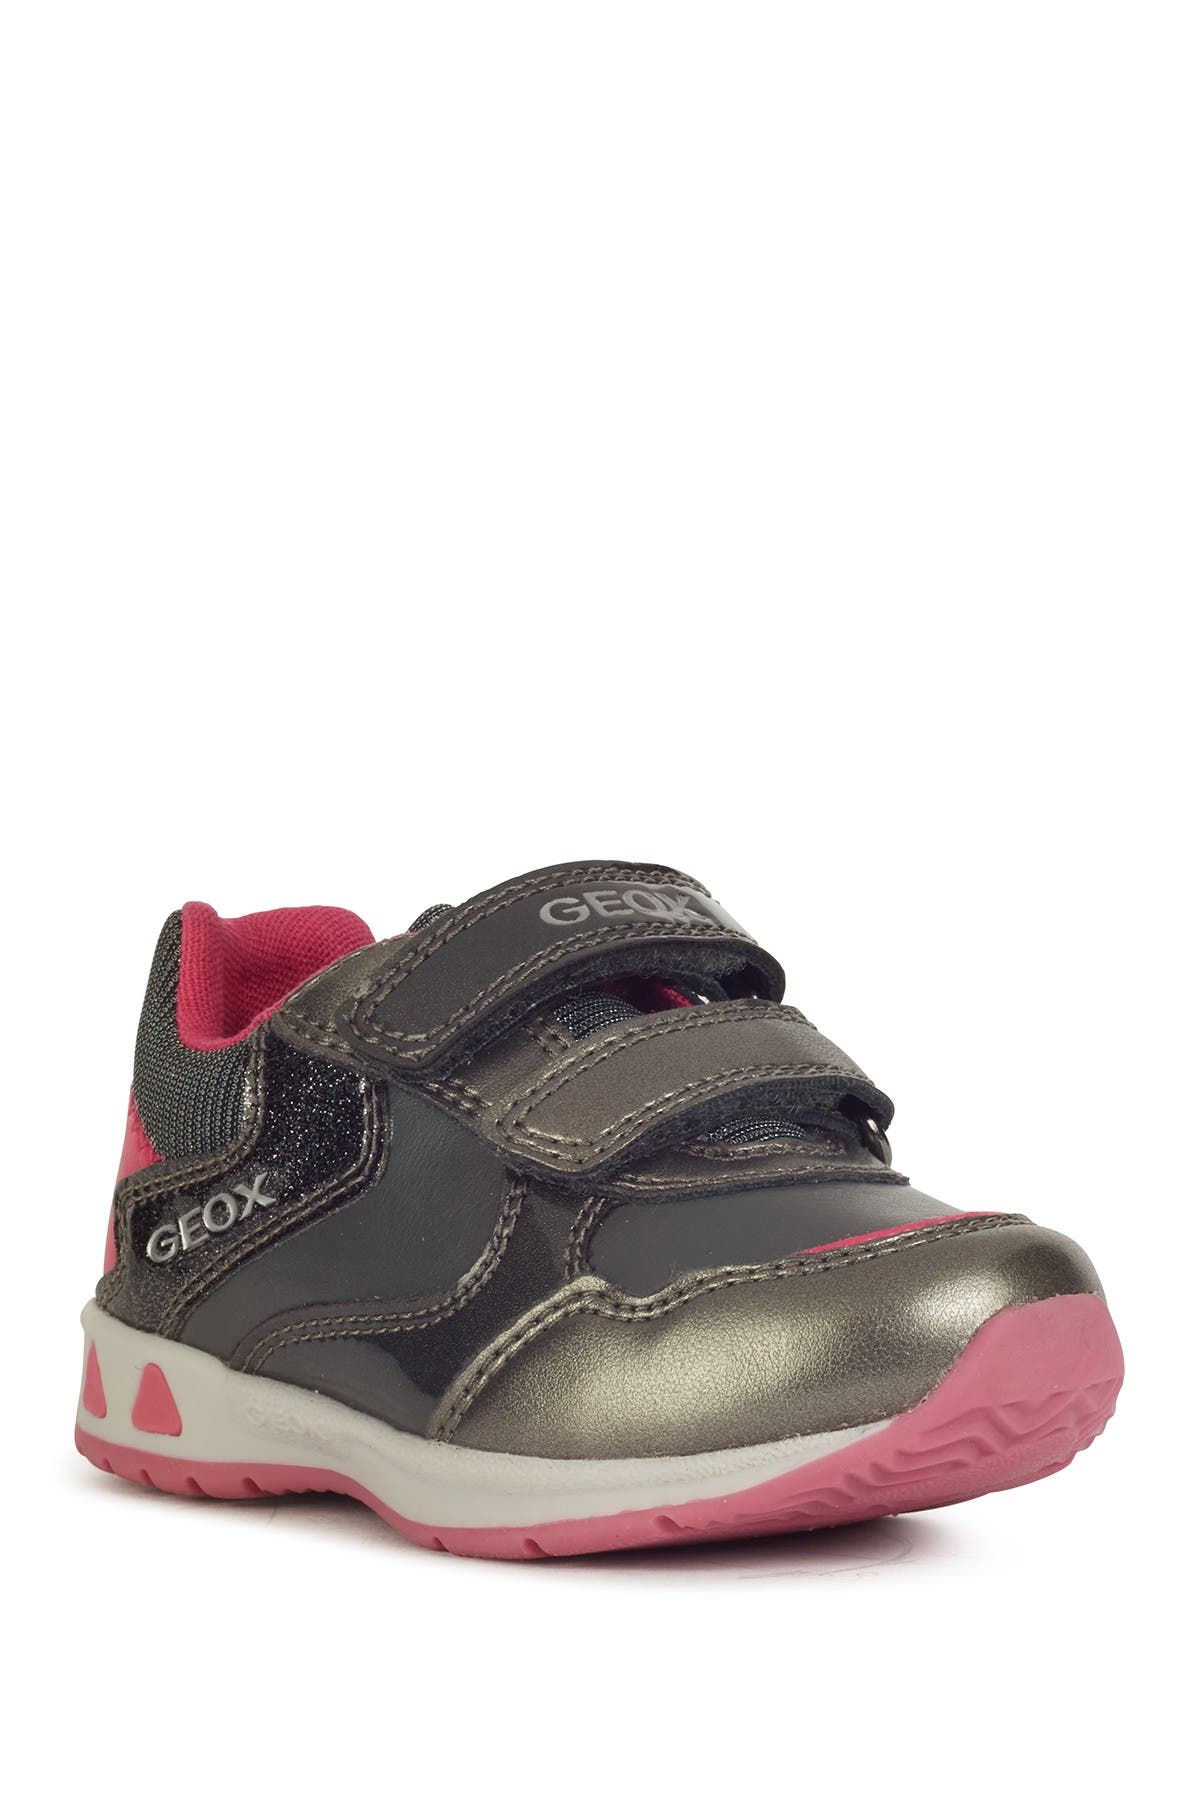 Details about   Geox Shoes Baby First Steps Sneakers Winter Leather For Baby Girl Grey 